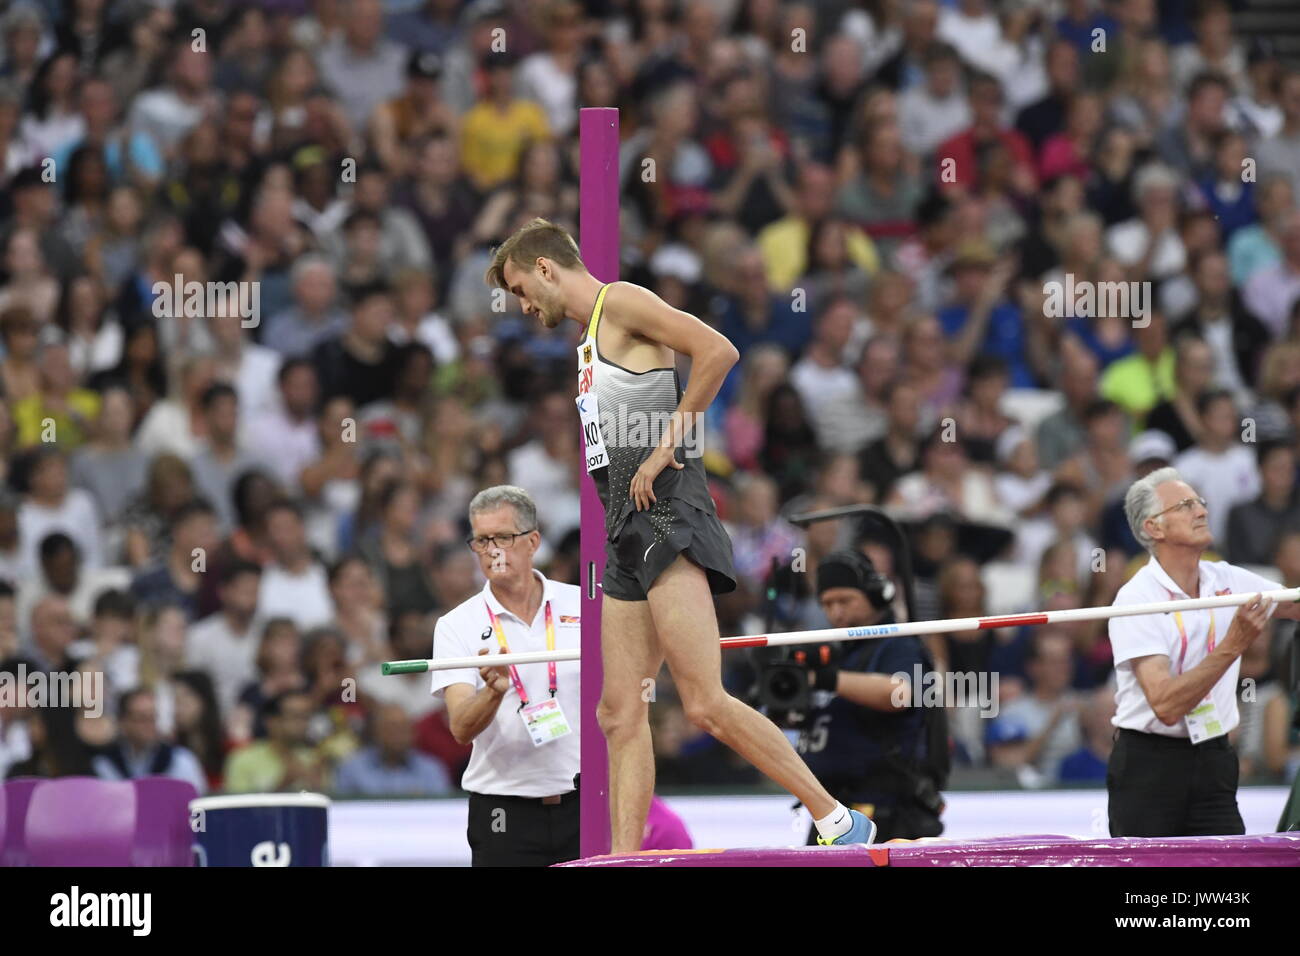 London, UK. 13th Aug, 2017. Germany's Mateusz Przybylko leaves the mat after his failed attempt at high jump at the IAAF London 2017 World Athletics Championships in London, United Kingdom, 13 August 2017. Photo: Rainer Jensen/dpa/Alamy Live News Stock Photo